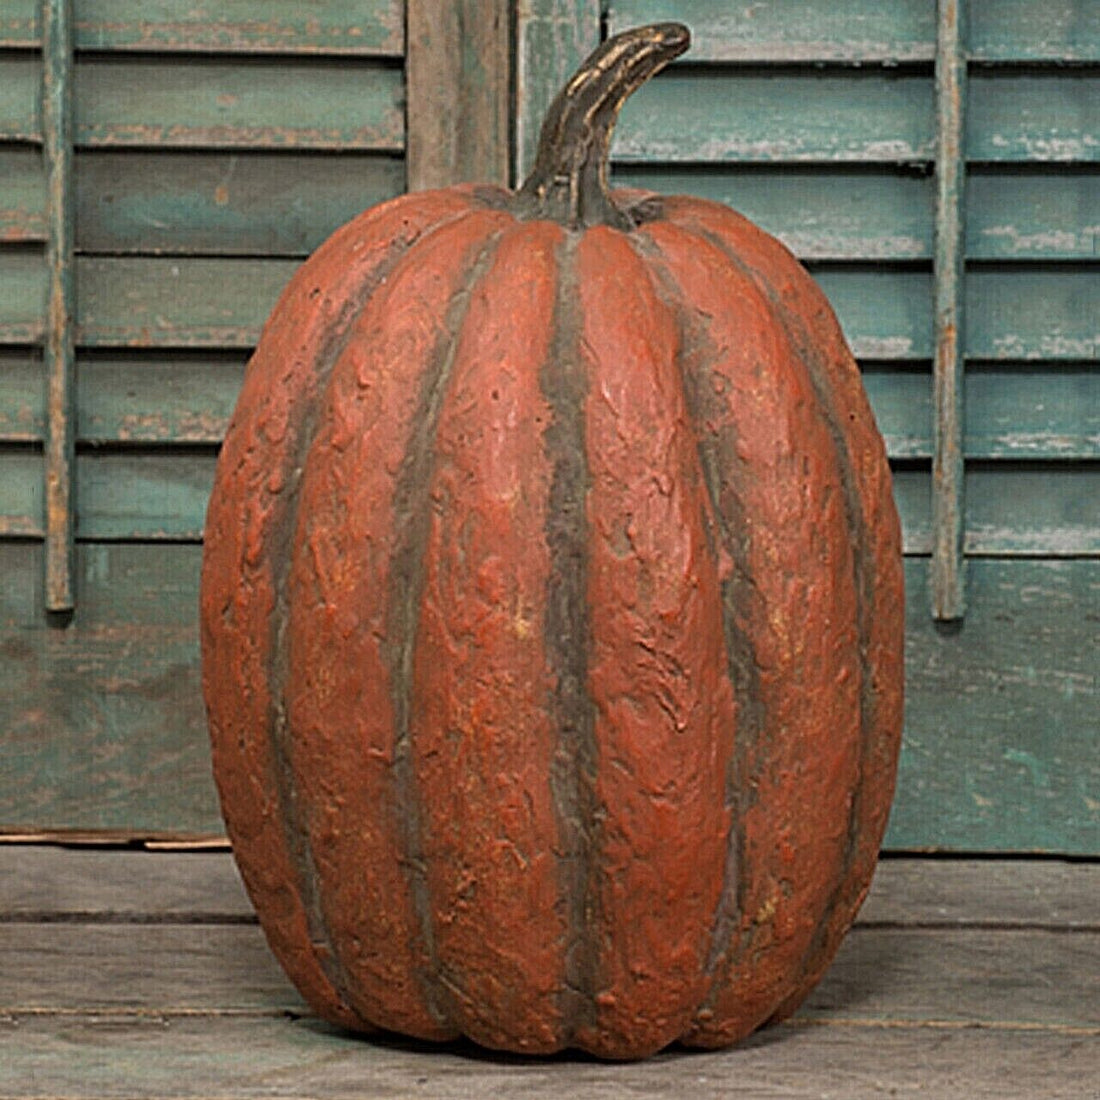 Primitive/Country Halloween Fall 14” Tall Orange Pumpkin Ragon House - The Primitive Pineapple Collection